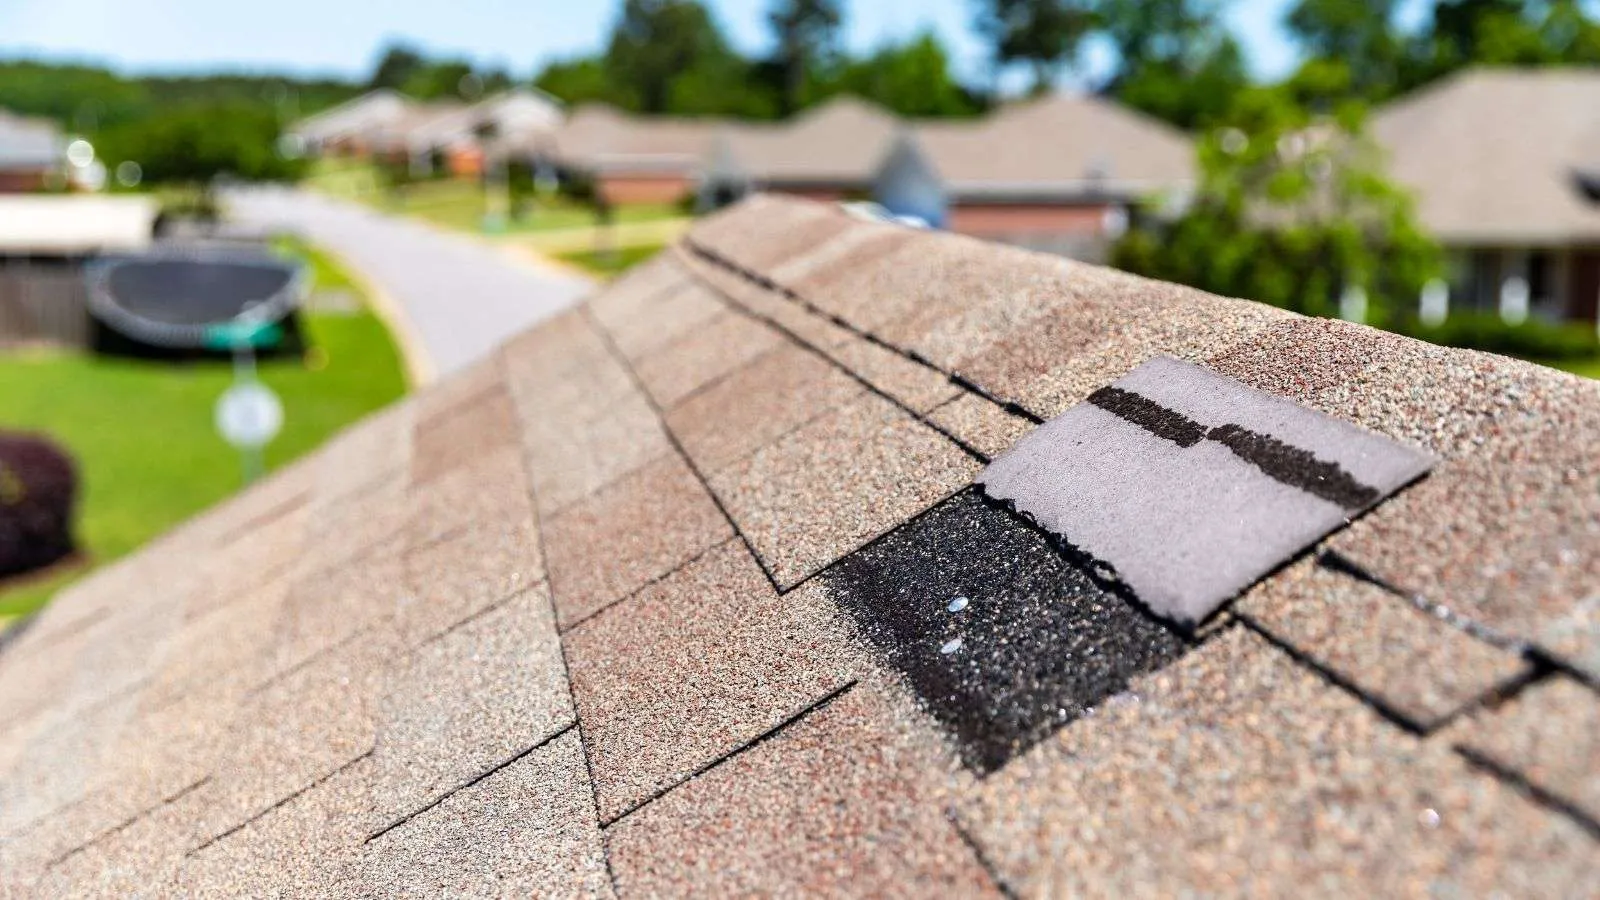 how to prevent wind uplift damage to roofs - bighomeprojects.com